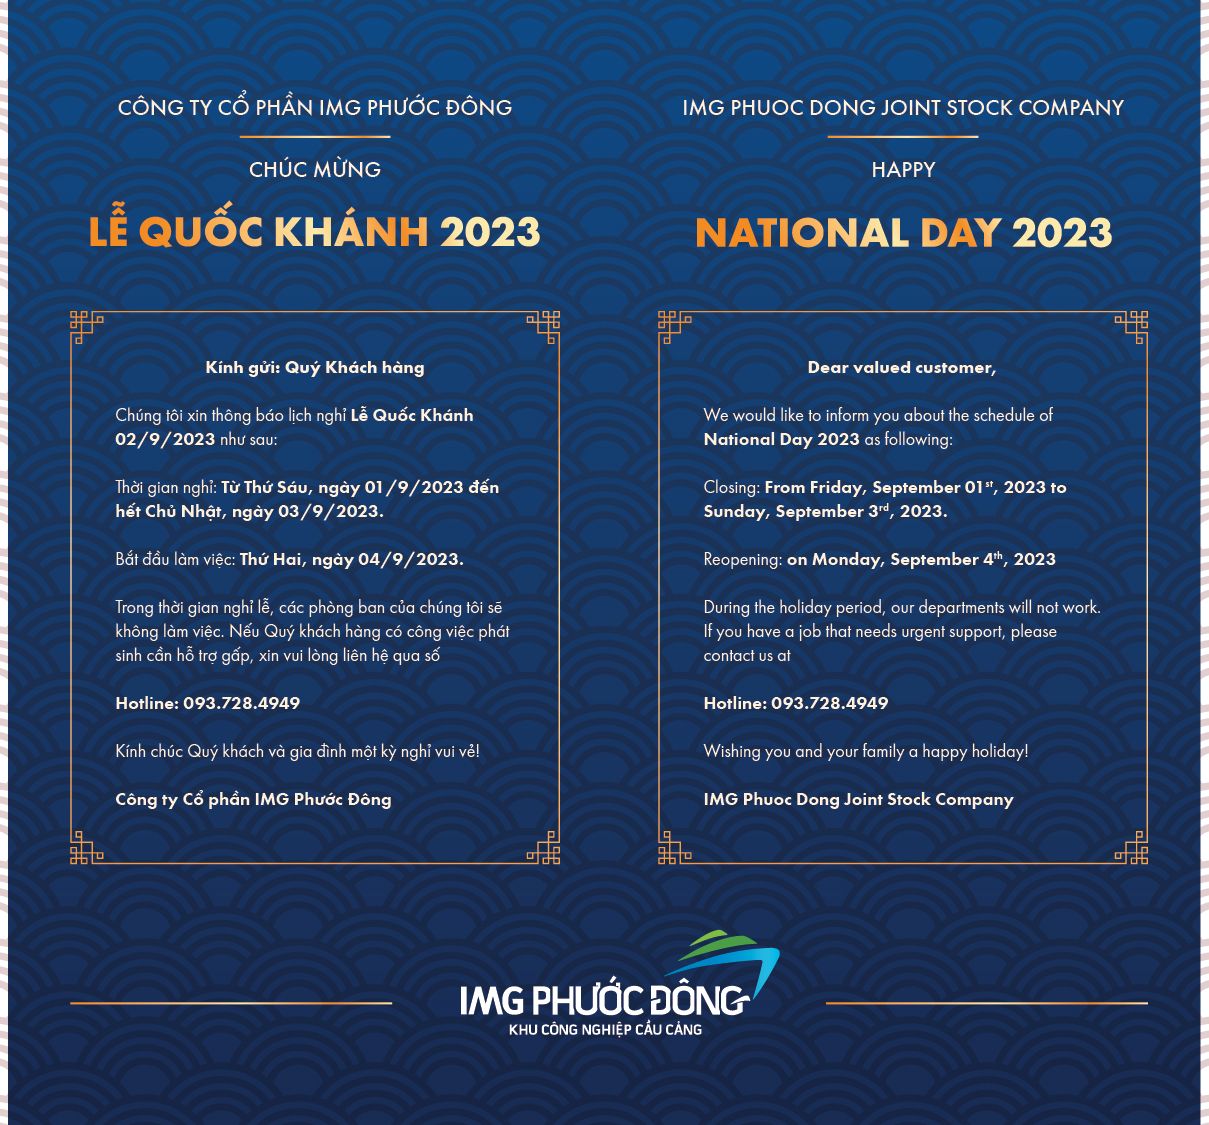 thong bao lich lam viec le quoc khanh 2023  national day working announcement